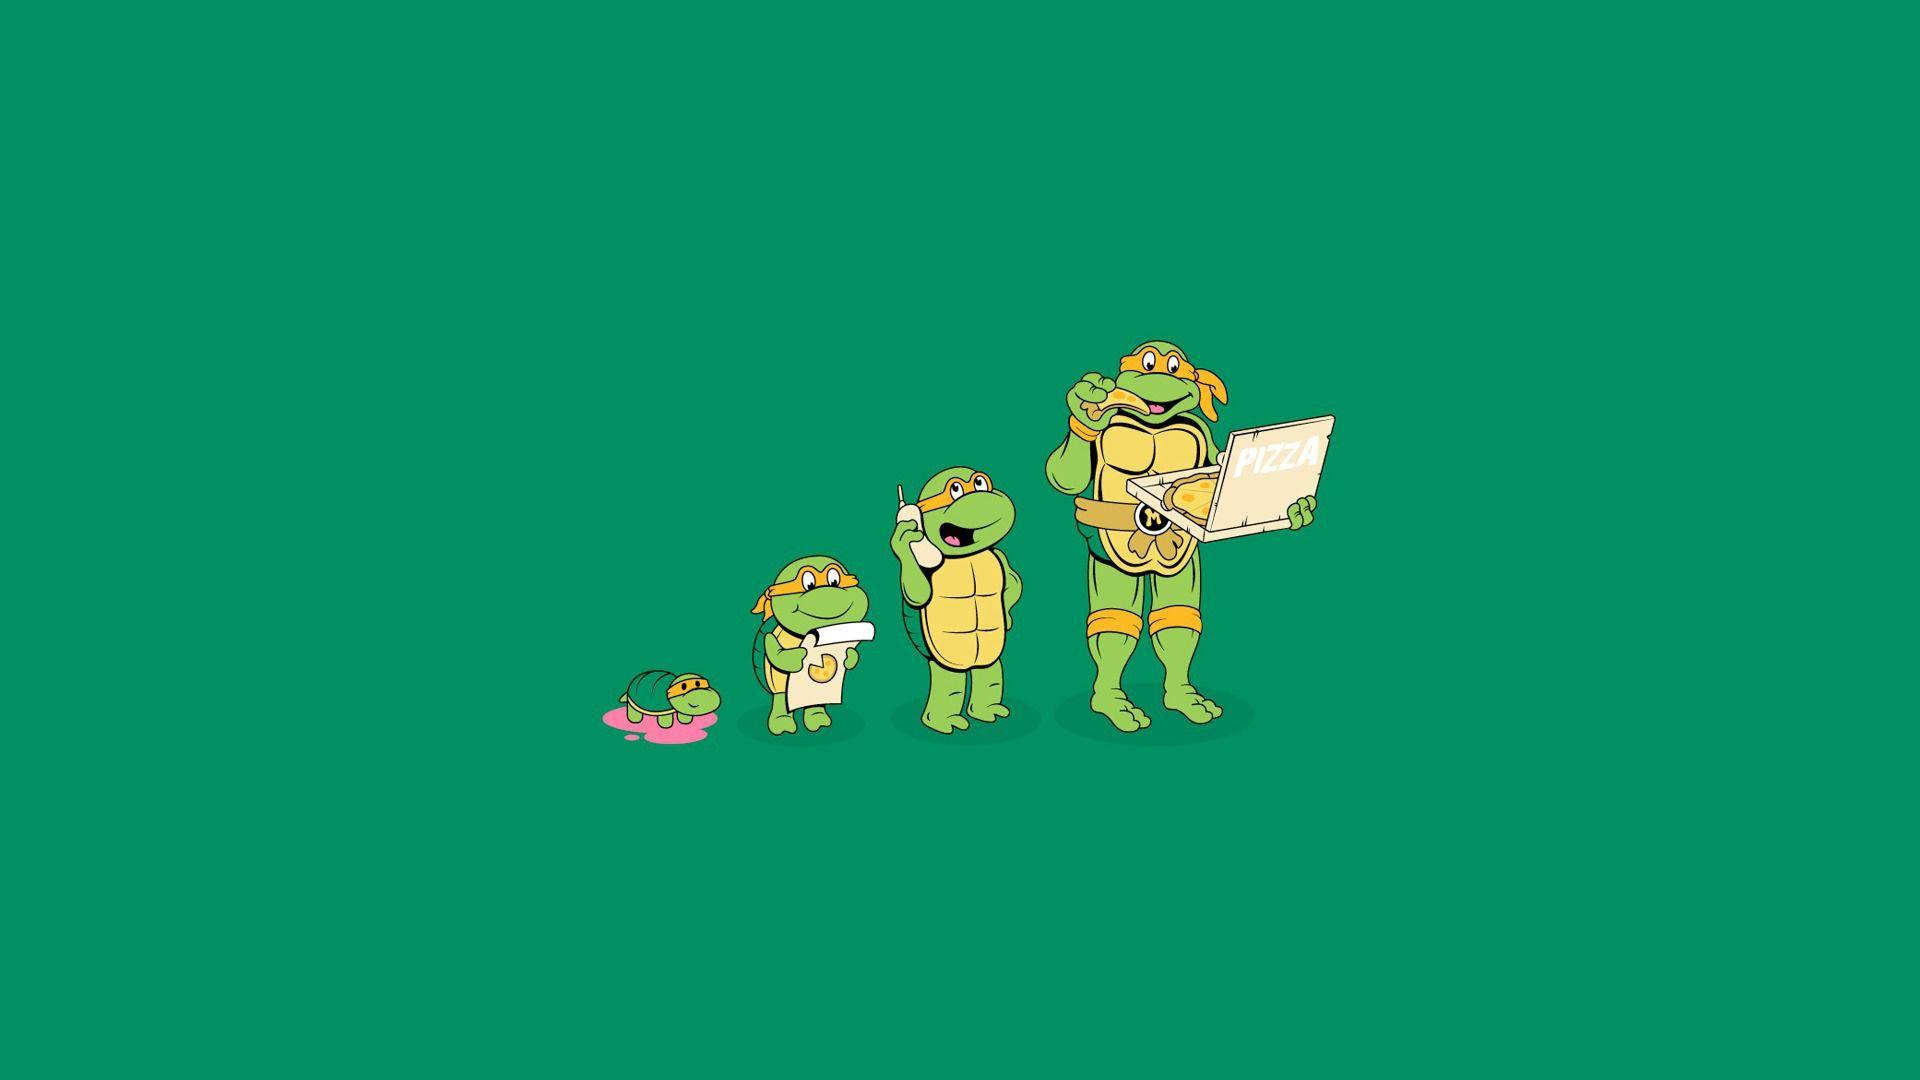 Ninja Turtles growth wallpaper and image, picture